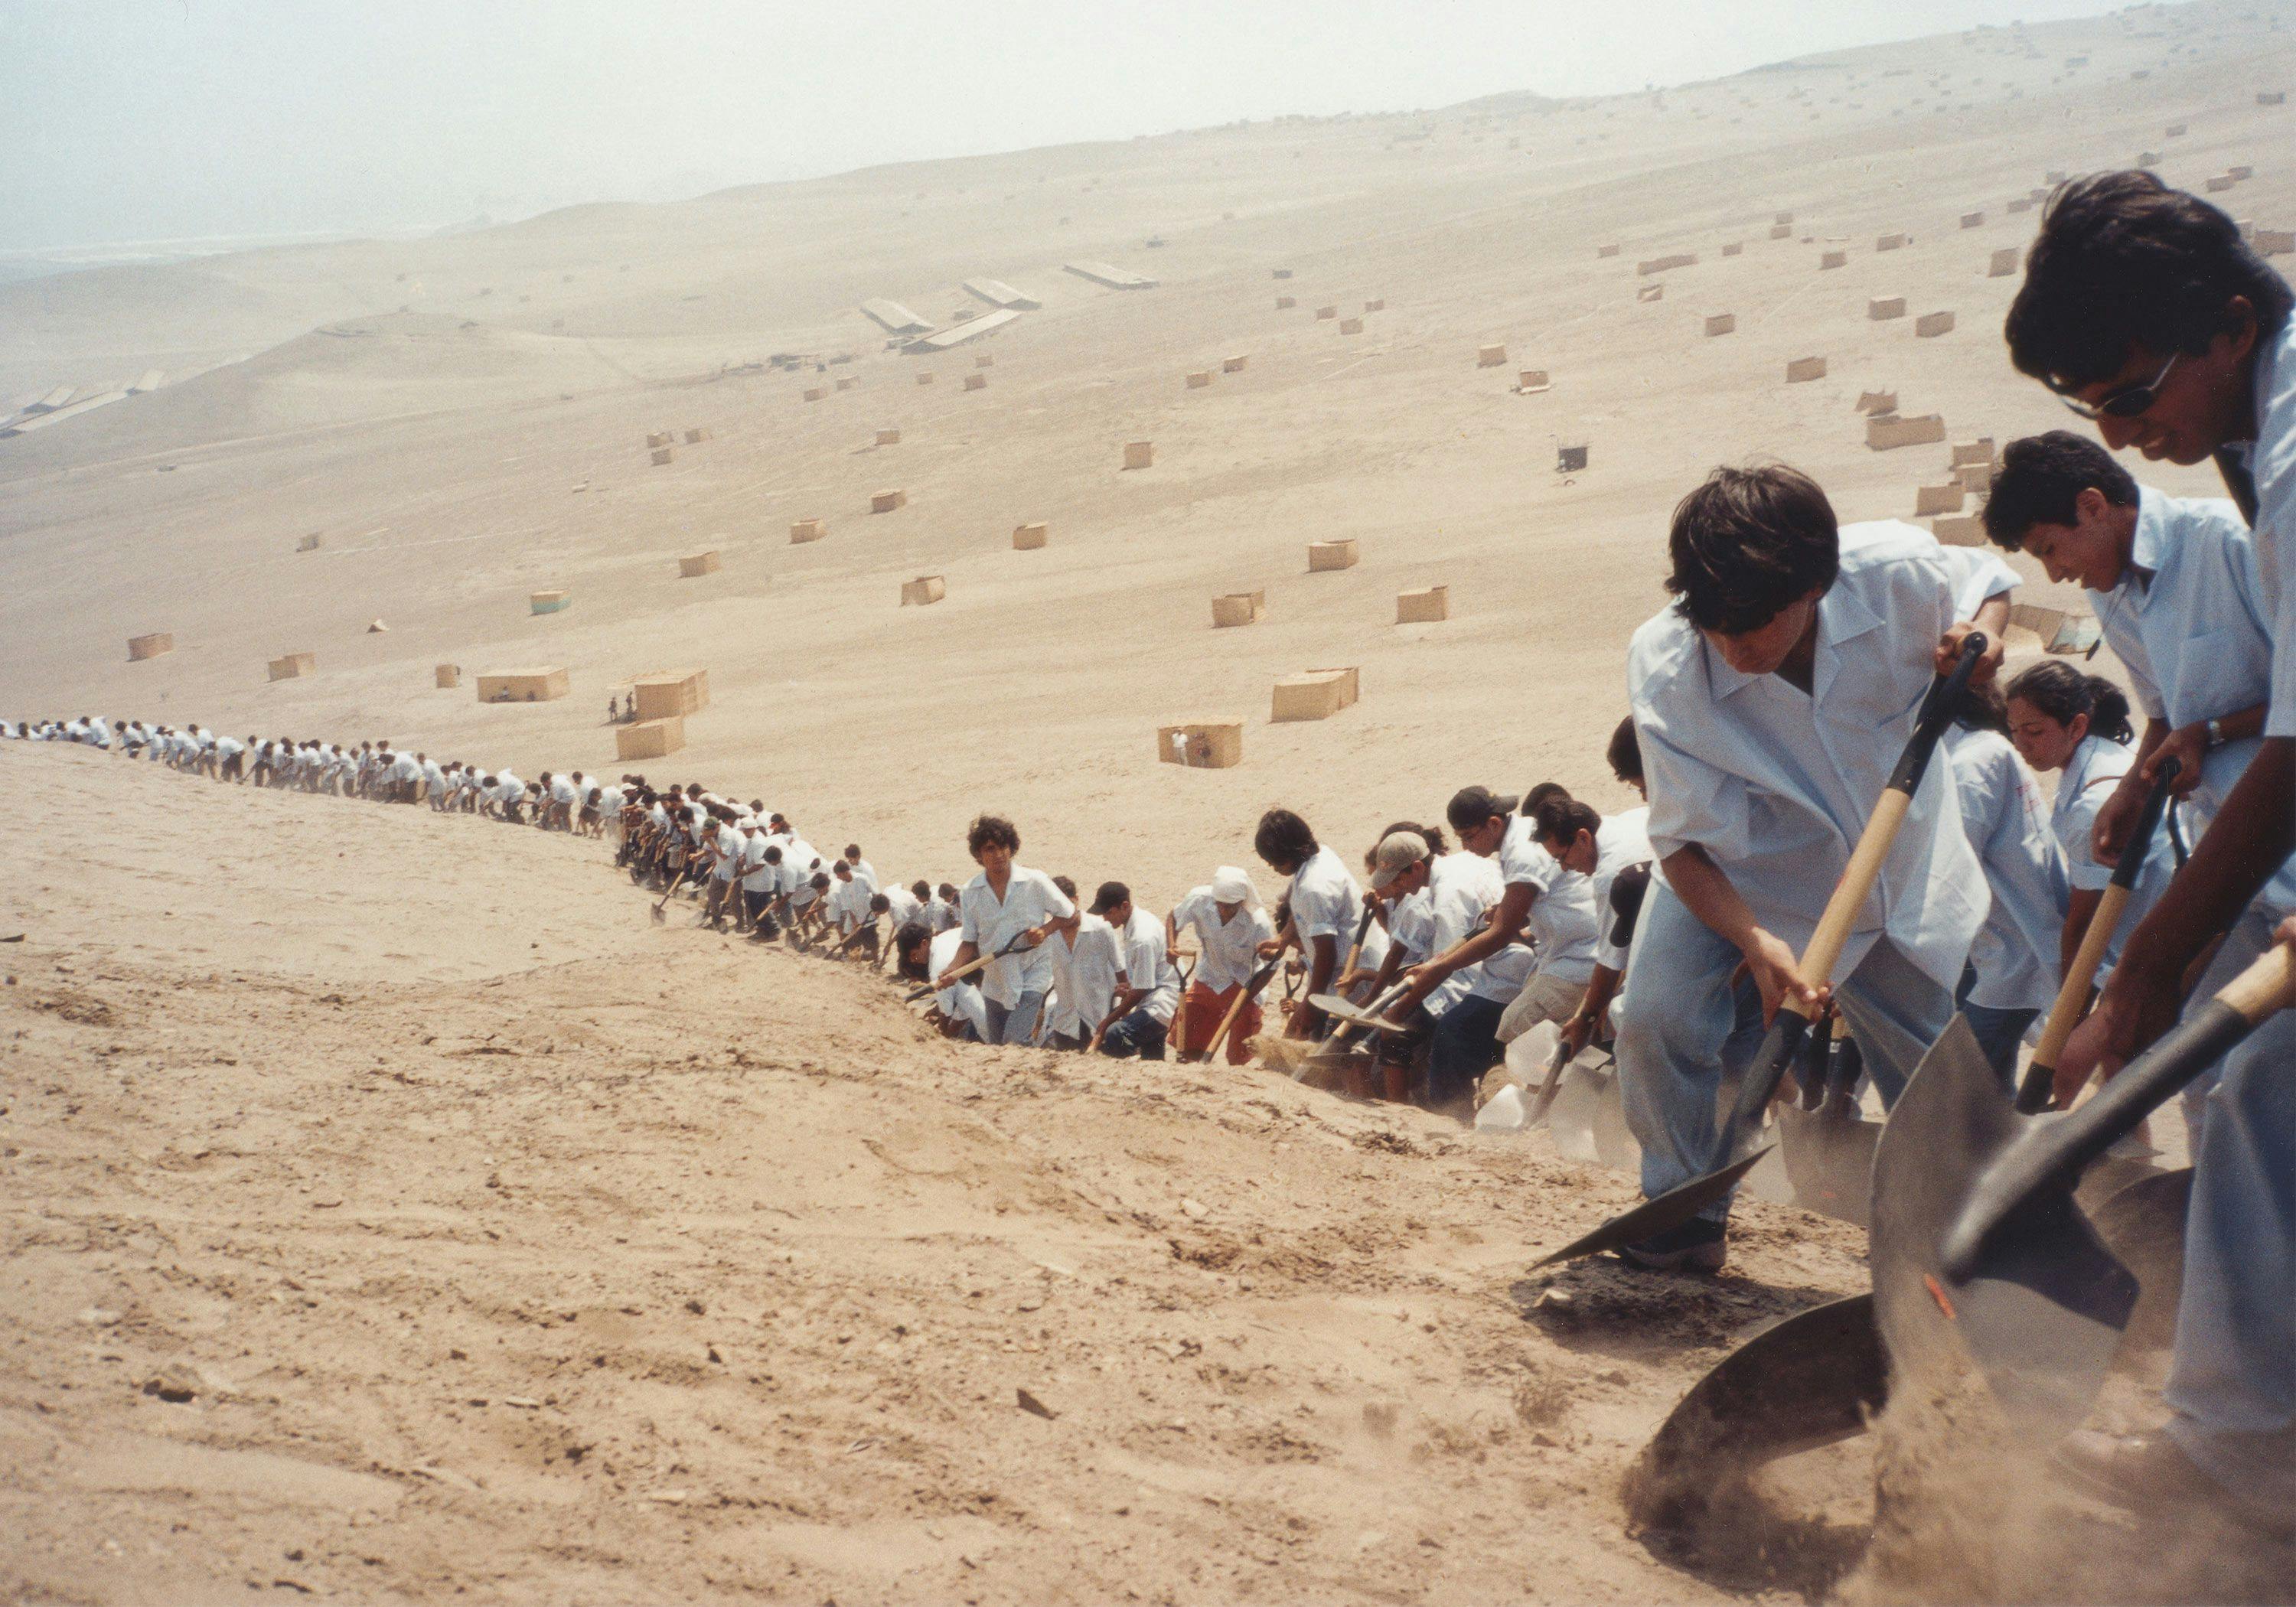 A video by Francis Alÿs (in collaboration with Cuauhtémoc Medina and Rafael Ortega), titled When Faith Moves Mountains, dated 2002.